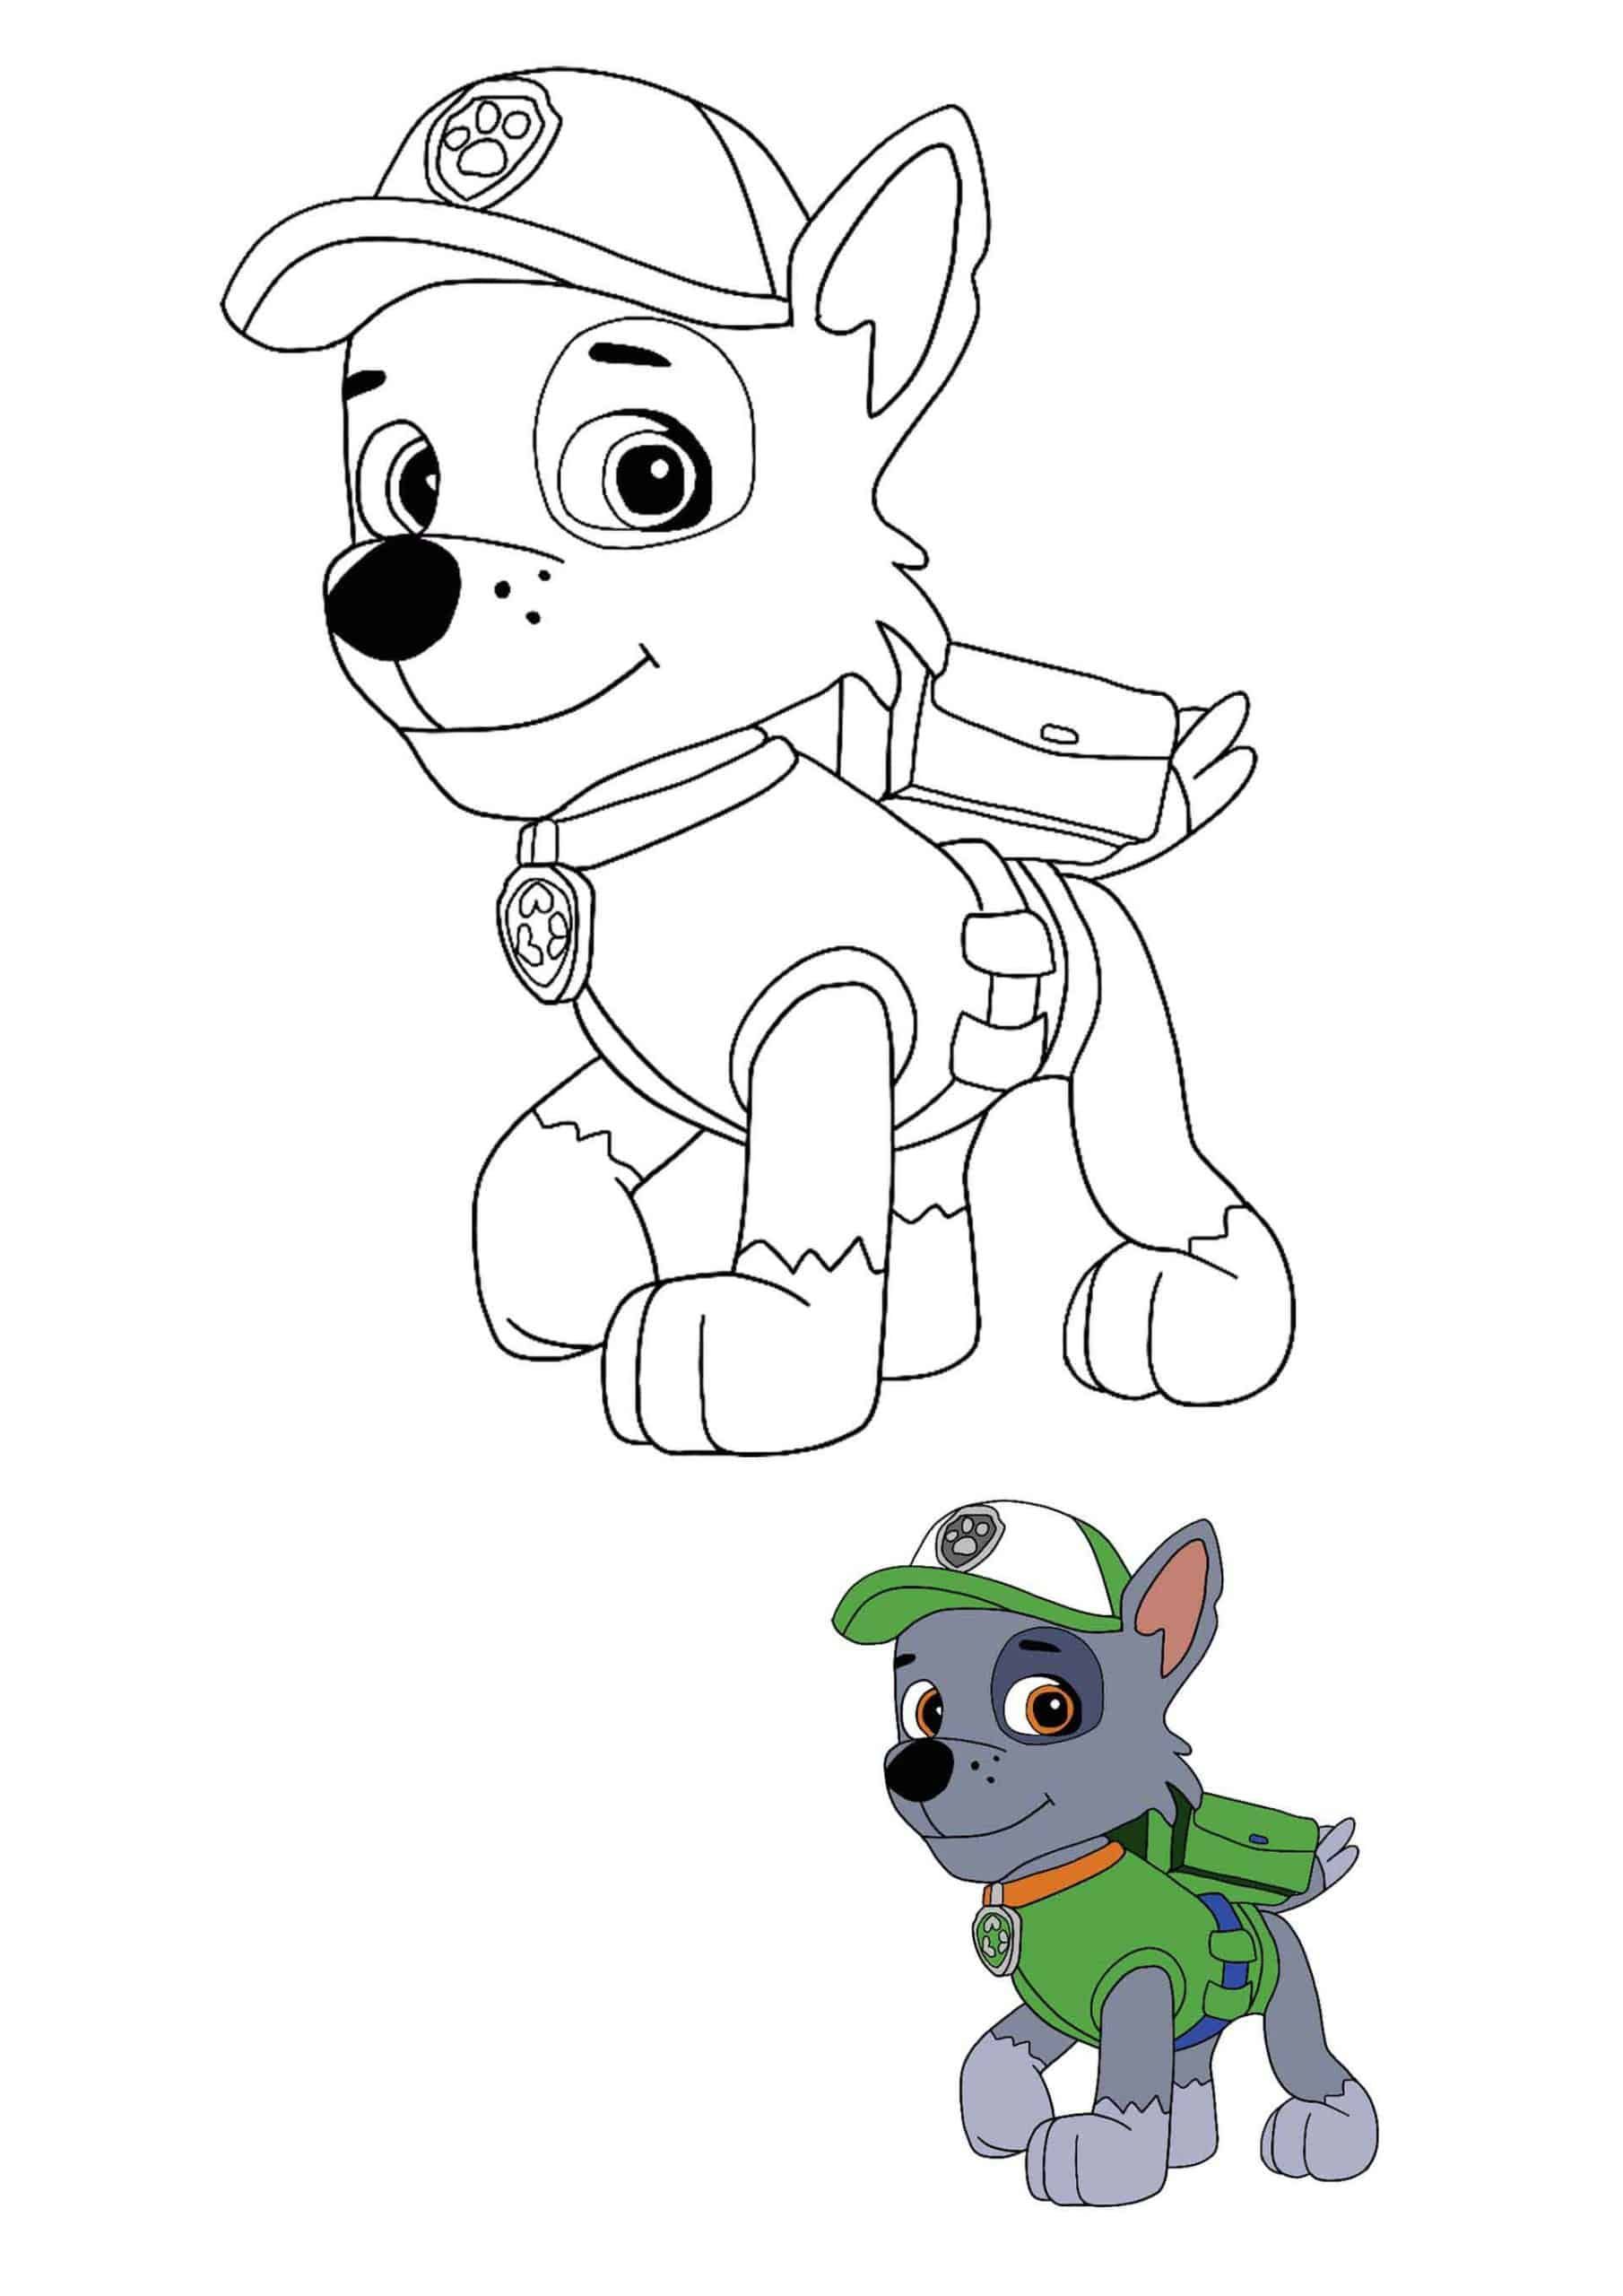 Paw patrol rocky coloring sheet with a sample paw patrol coloring paw patrol coloring pages paw patrol rocky